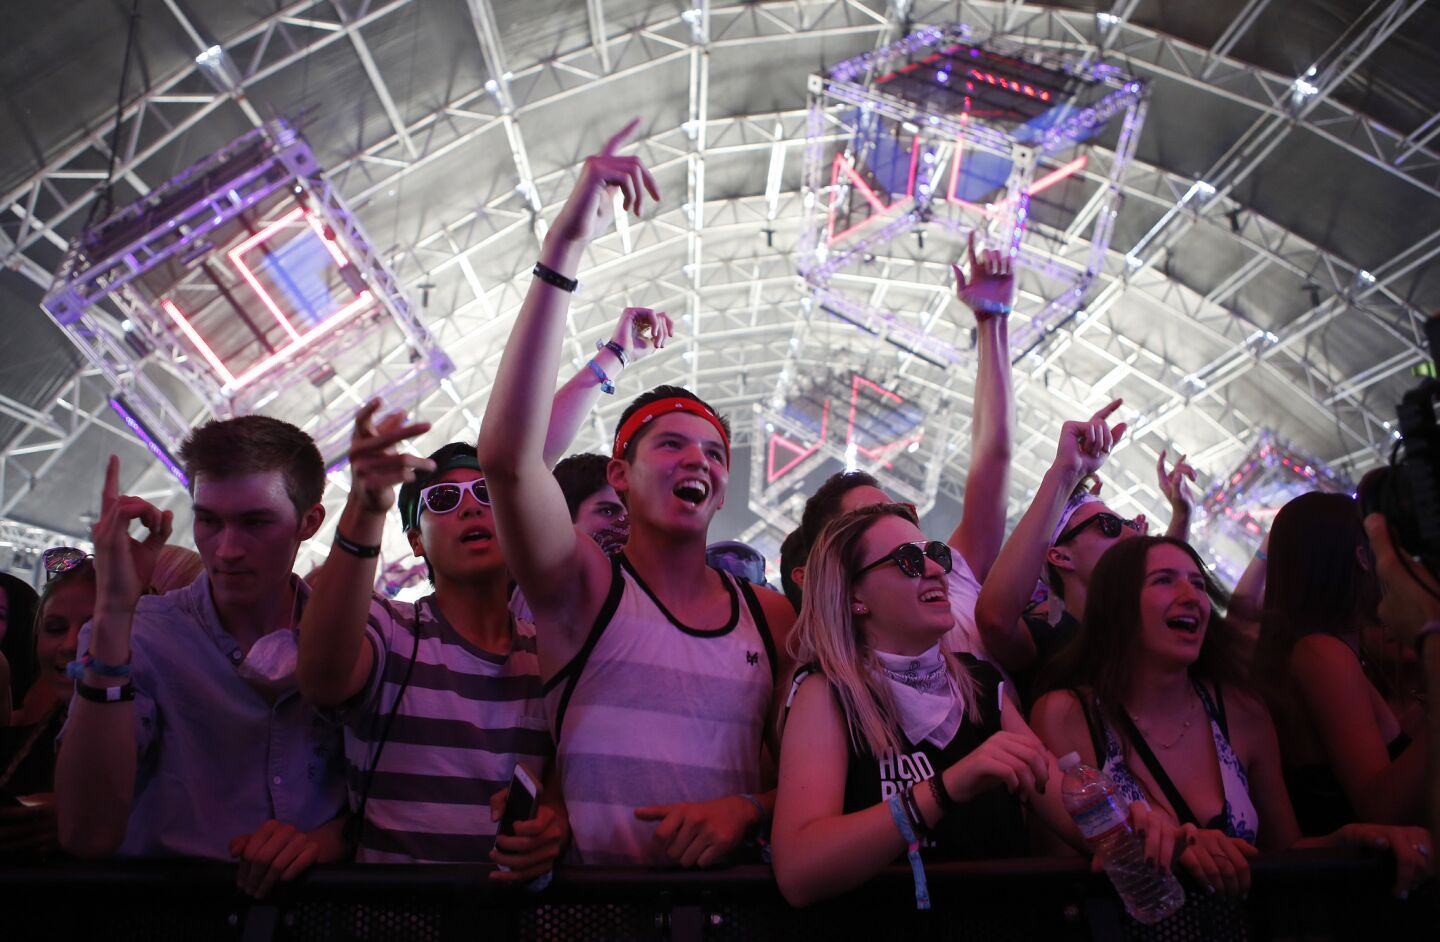 Fans cheer, dance and sing along as Vanic performs at Coachella.